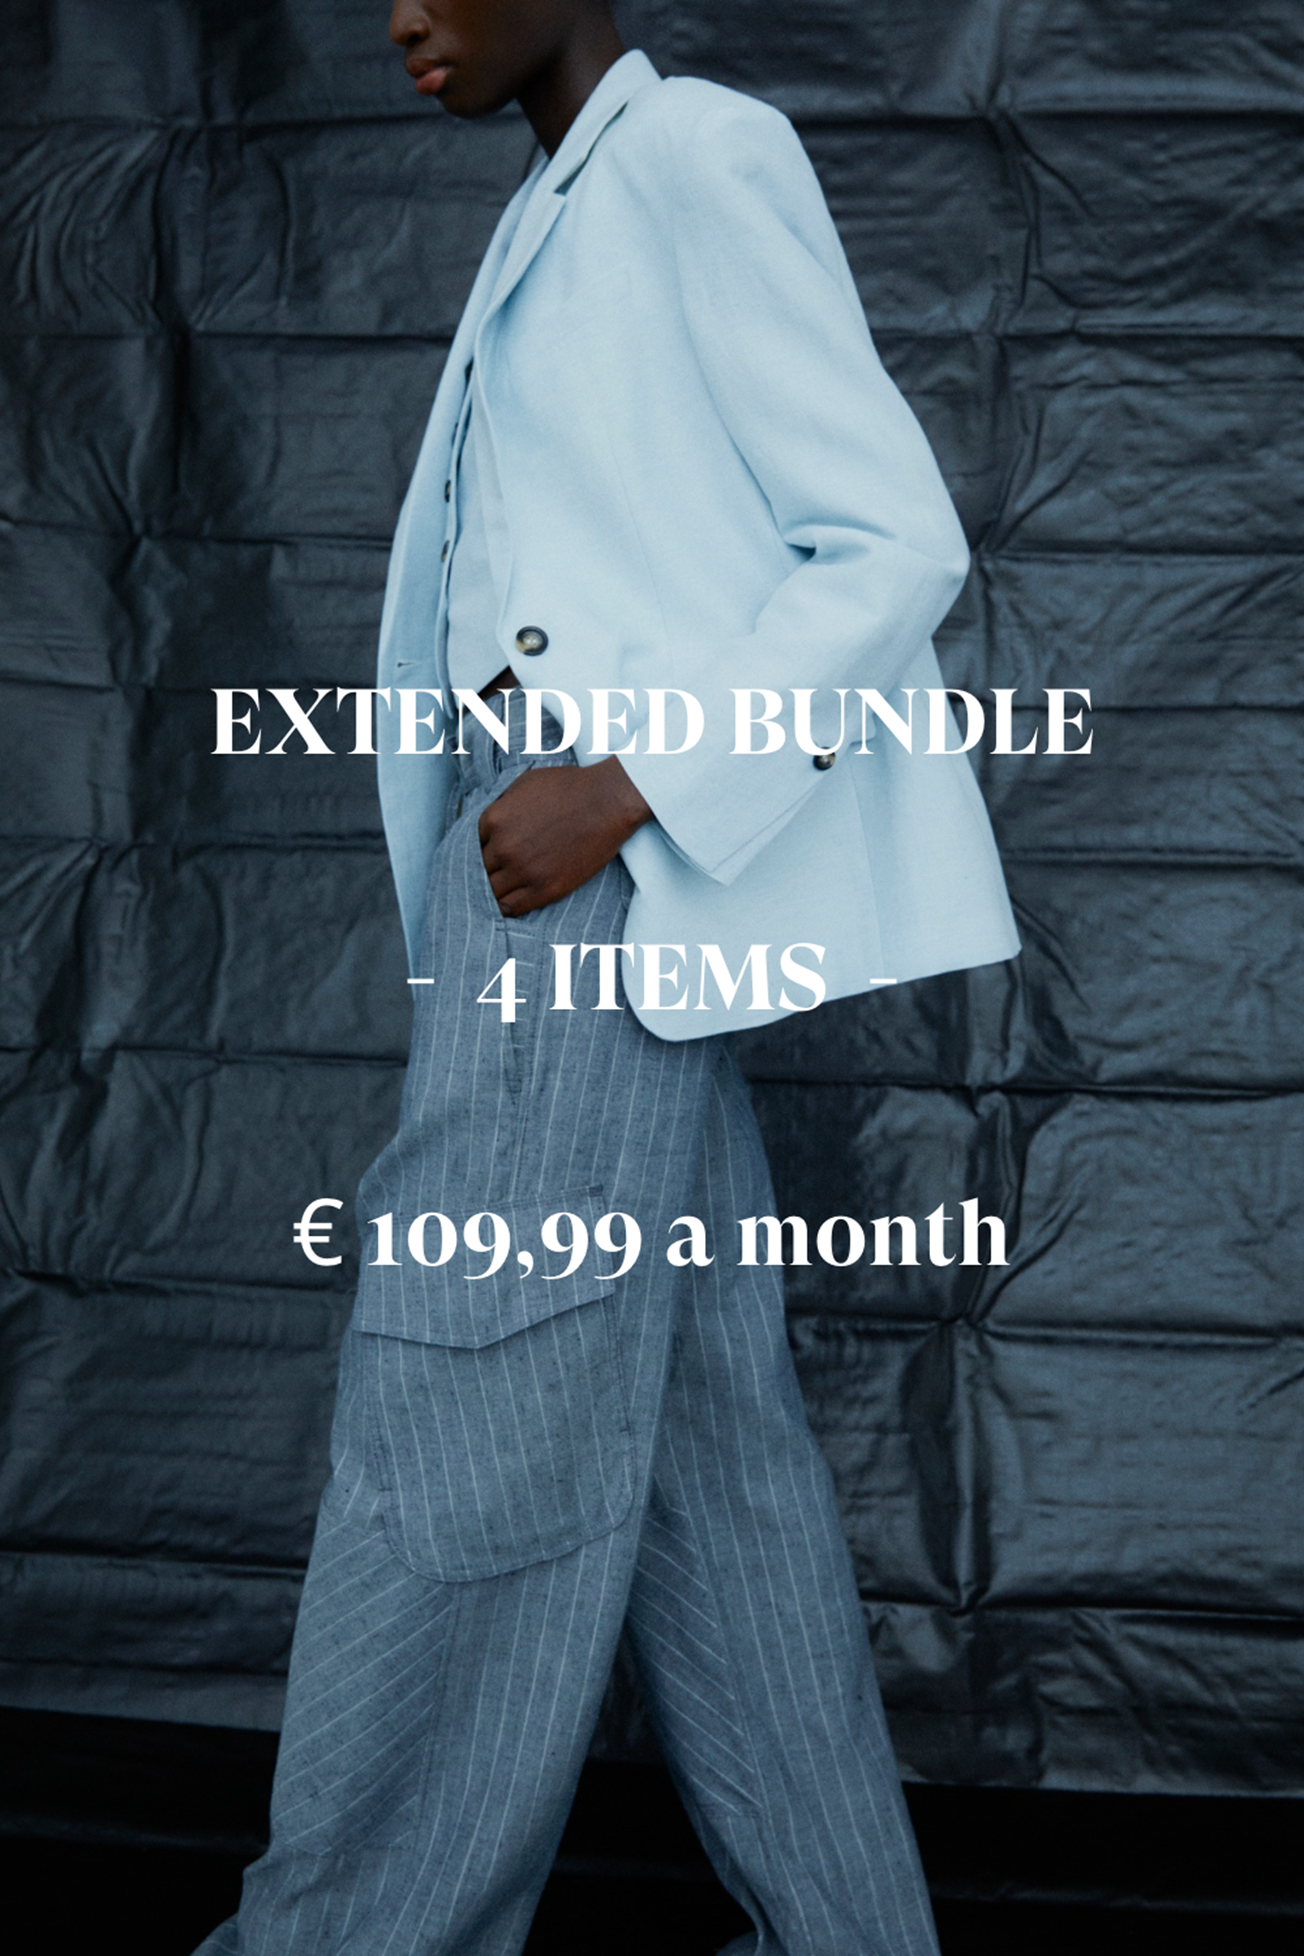 EXTENDED BUNDLE - 4 ITEMS €109,99 a month